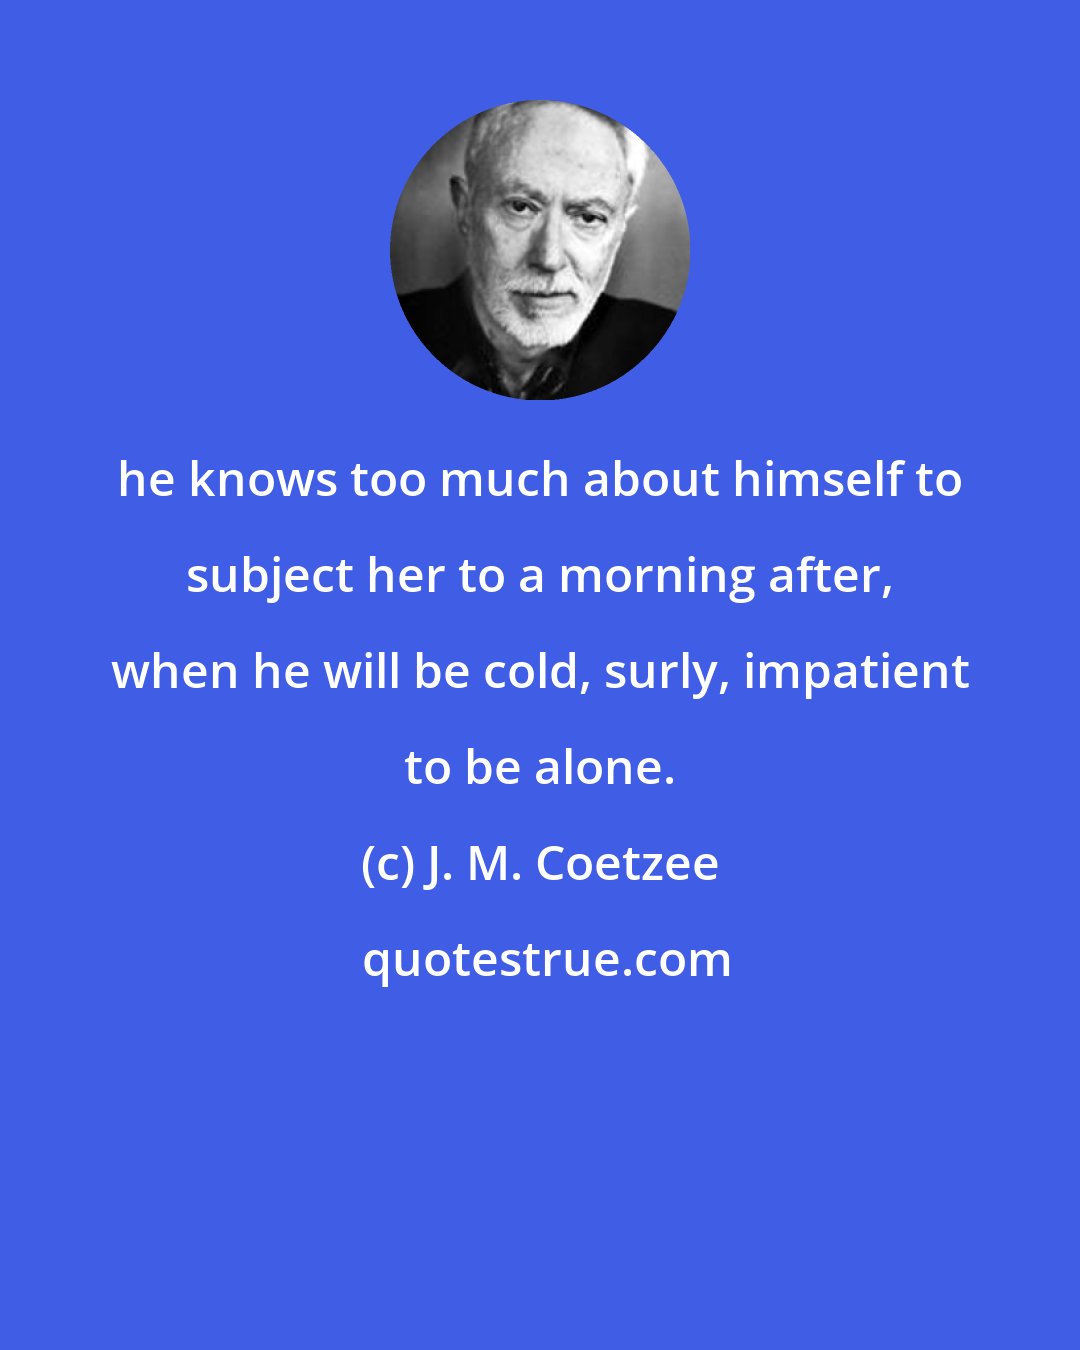 J. M. Coetzee: he knows too much about himself to subject her to a morning after, when he will be cold, surly, impatient to be alone.